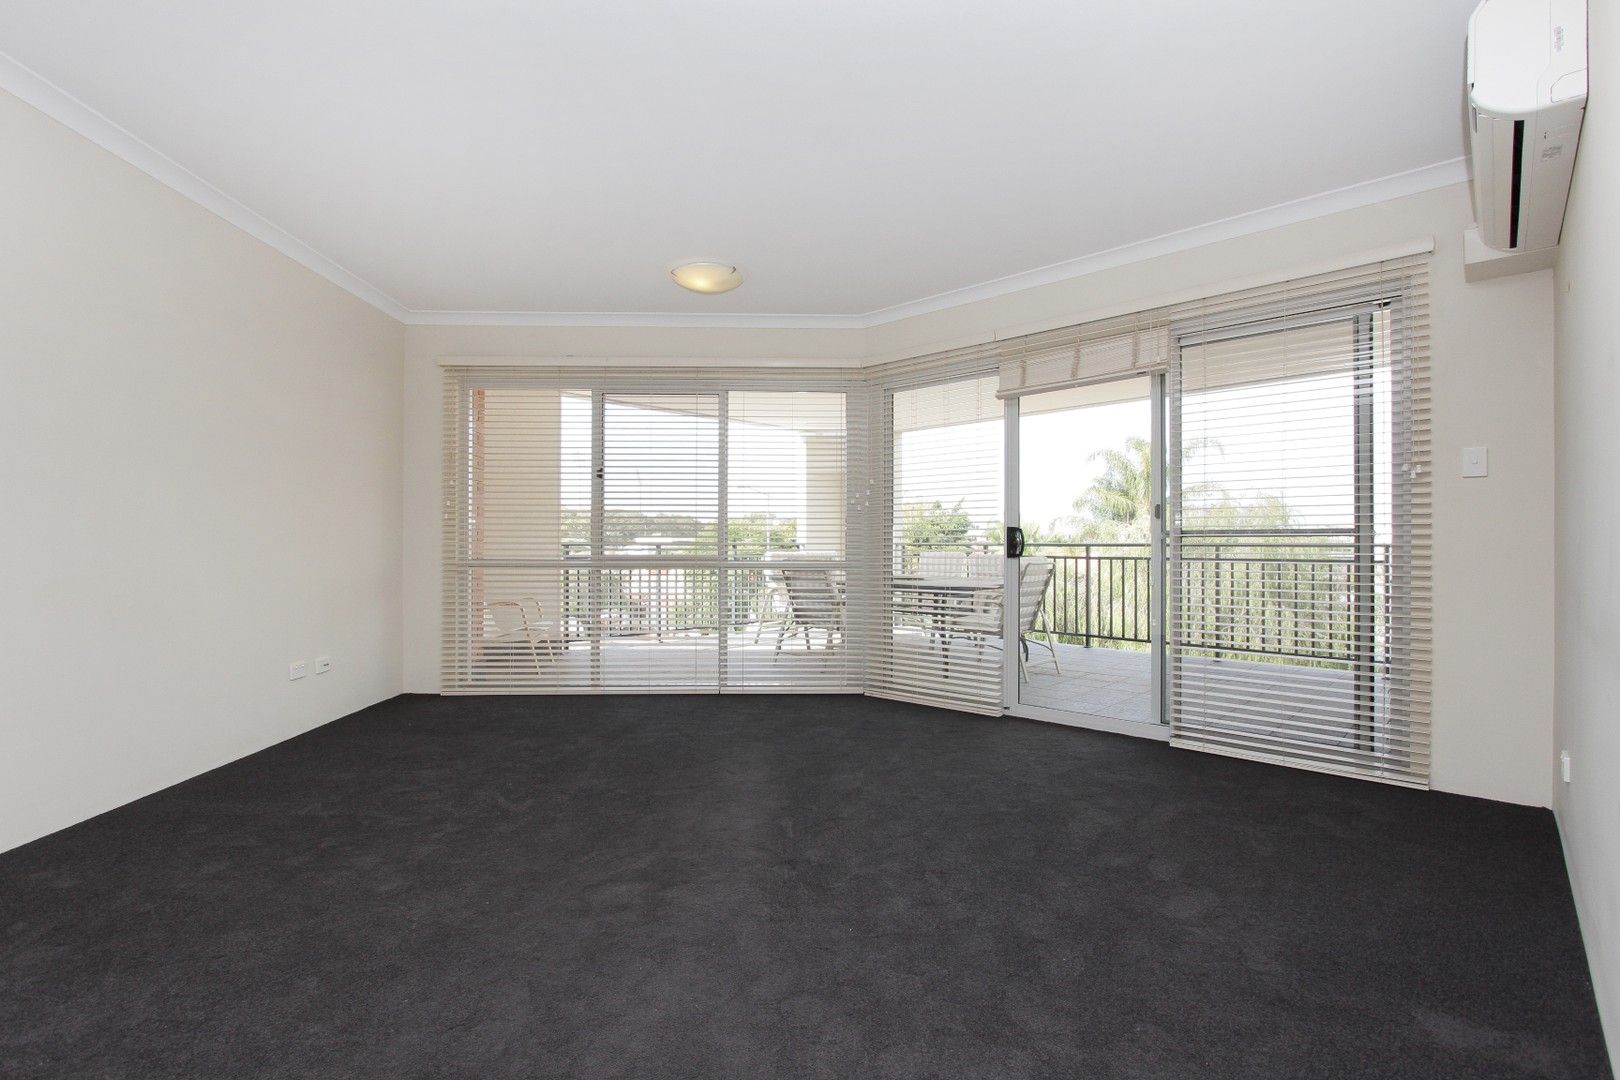 1 bedrooms House in 43/76 Newcastle Street PERTH WA, 6000